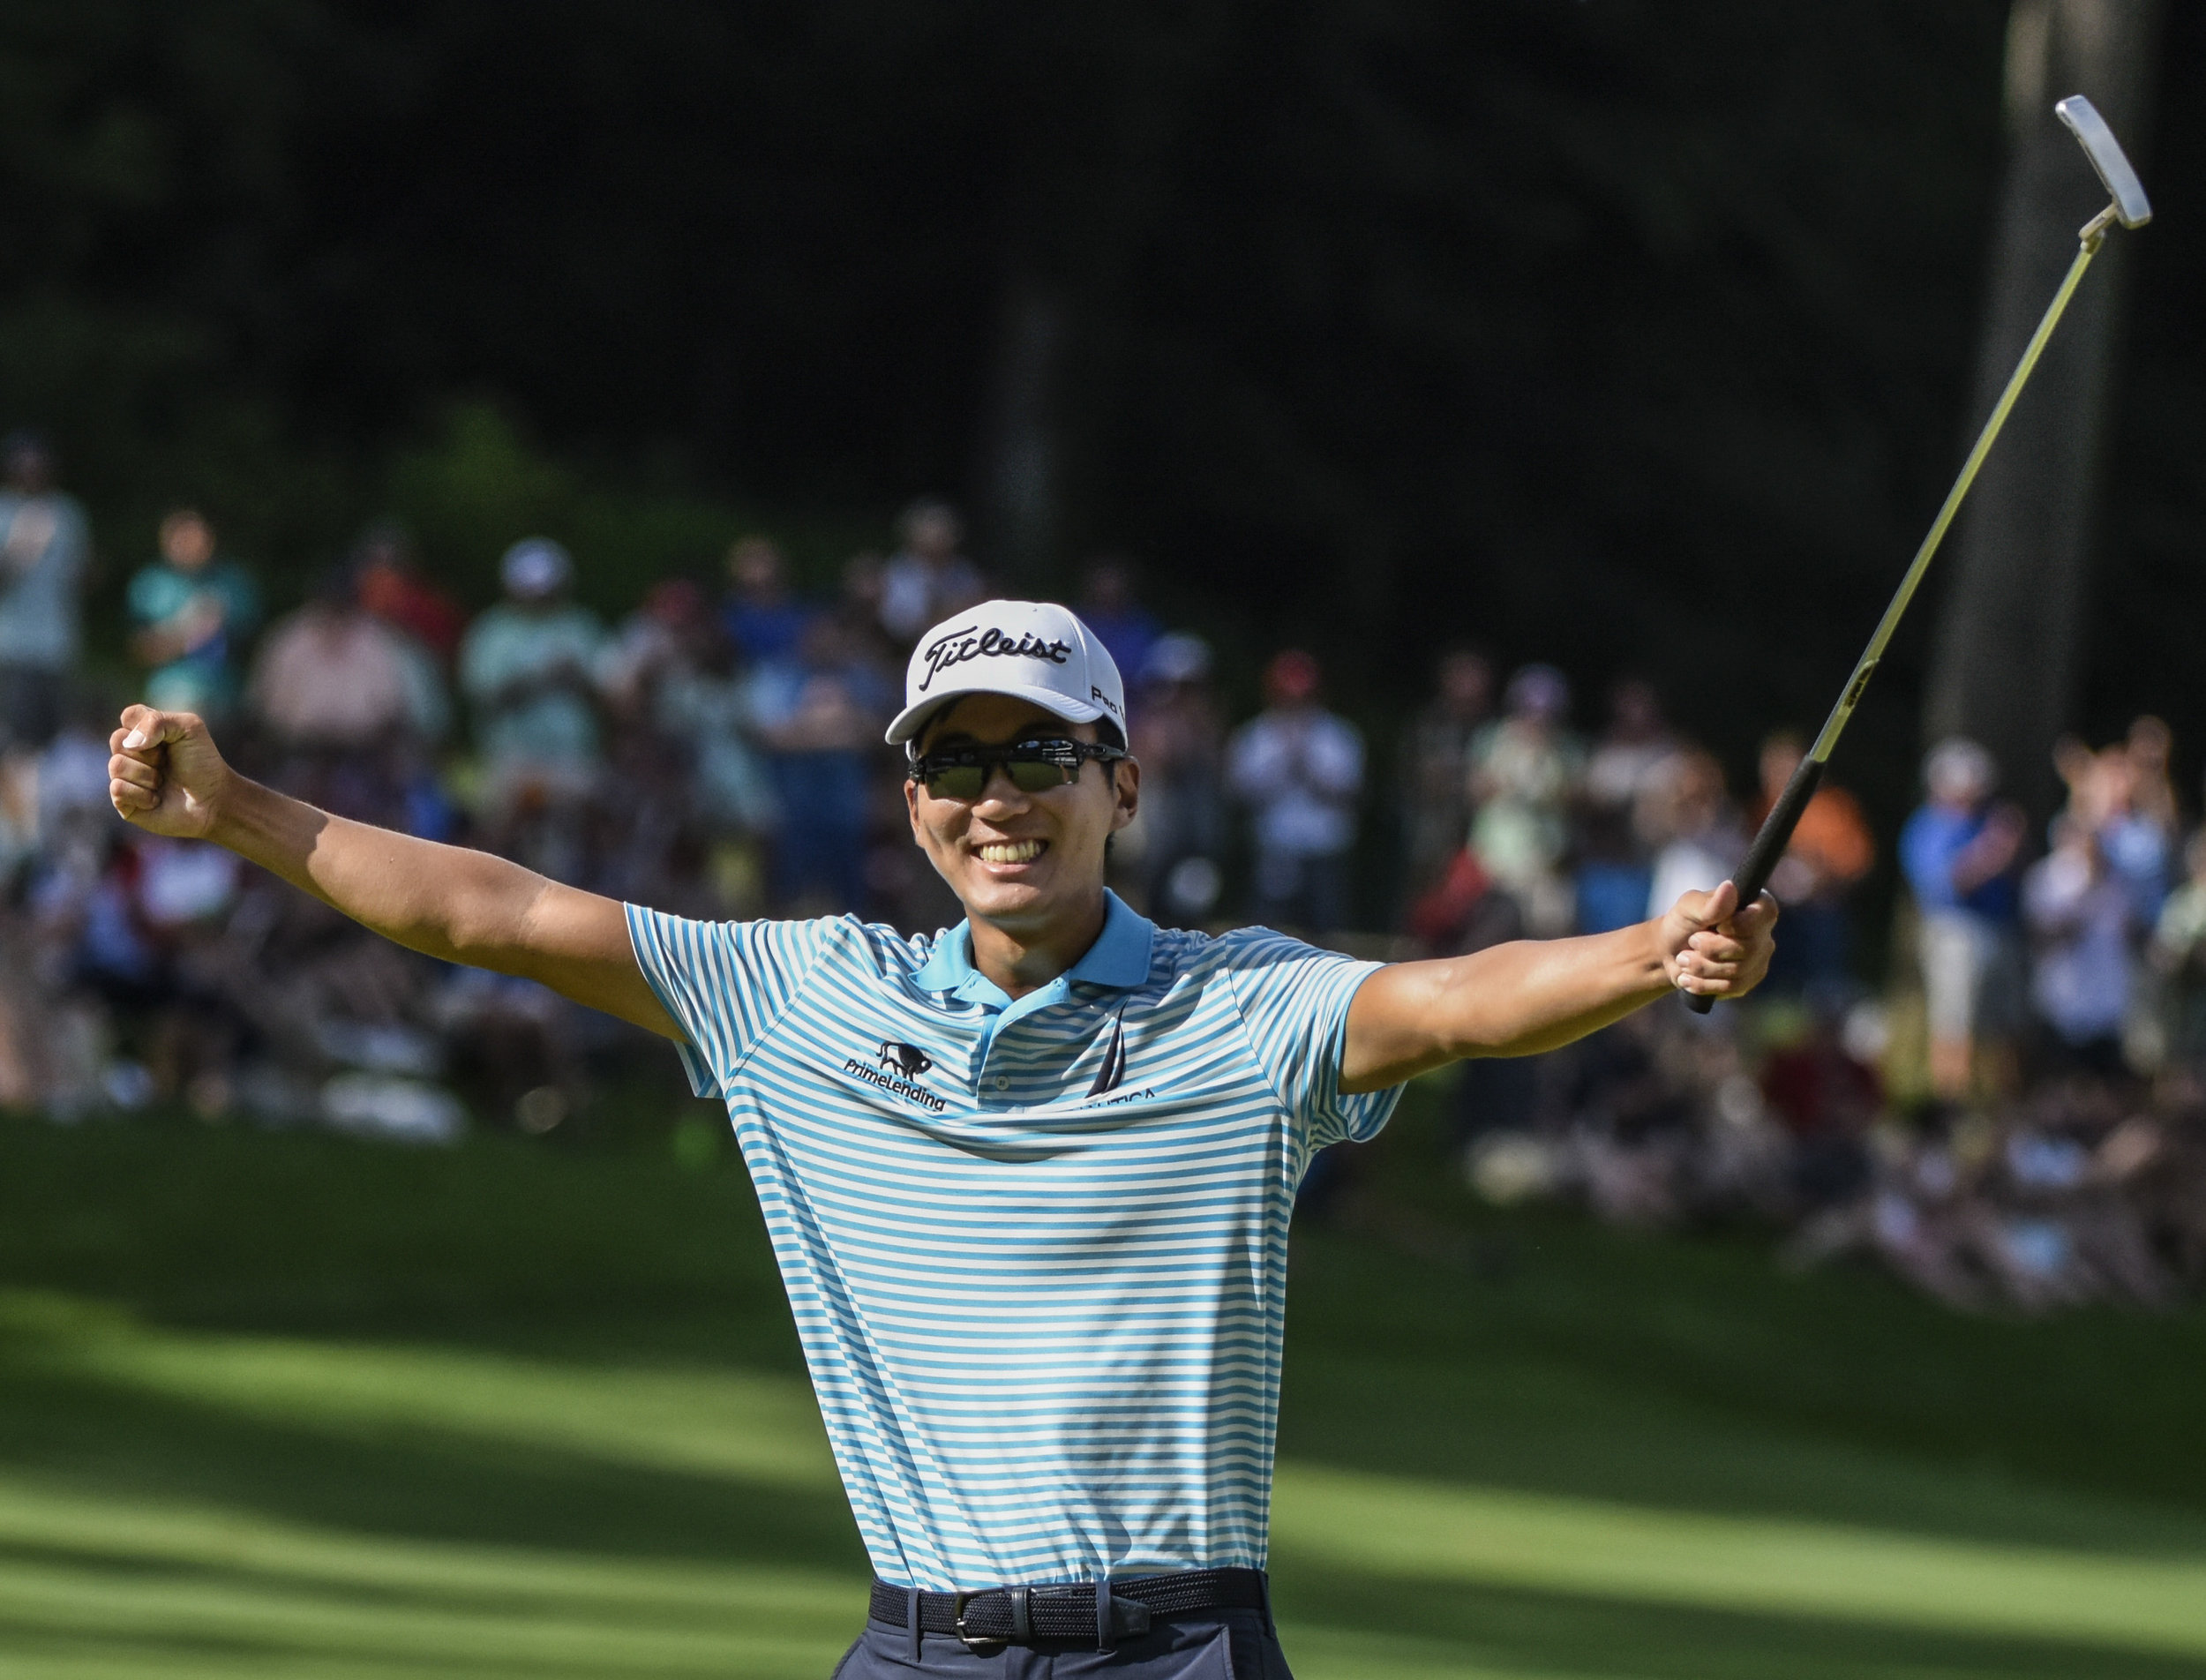  Michael Kim celebrates by throwing his hands into the air after his last putt on the 18th hole where he become the winner of the John Deere Classic golf tournament on Sunday, July 15, 2018, in Silvis. 